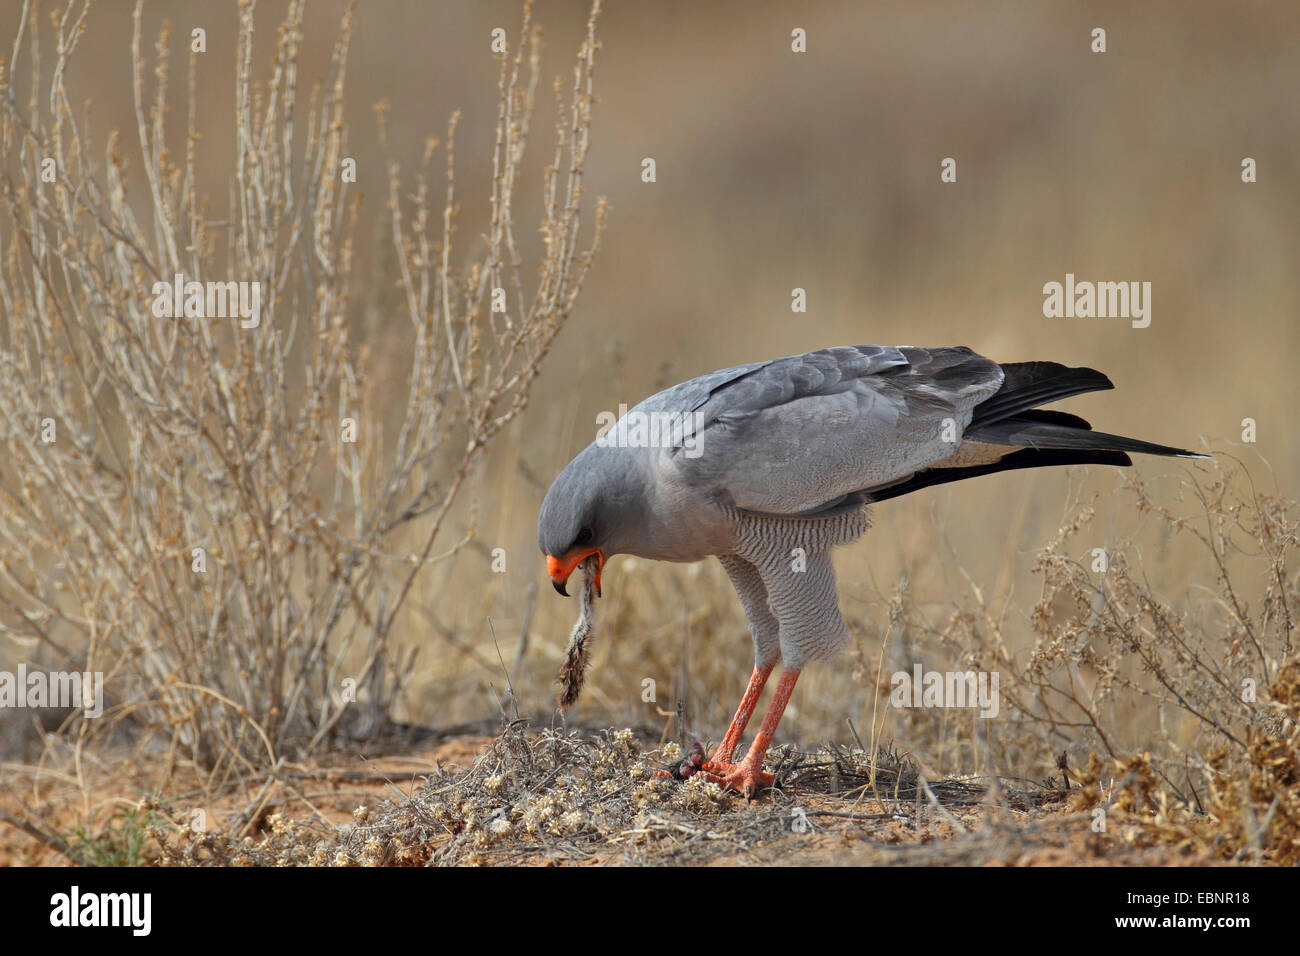 Somali chanting-goshawk, Eastern pale chanting goshawk (Melierax poliopterus), adult goshawk stands on the ground and eats a small mammal, South Africa, Kgalagadi Transfrontier National Park Stock Photo